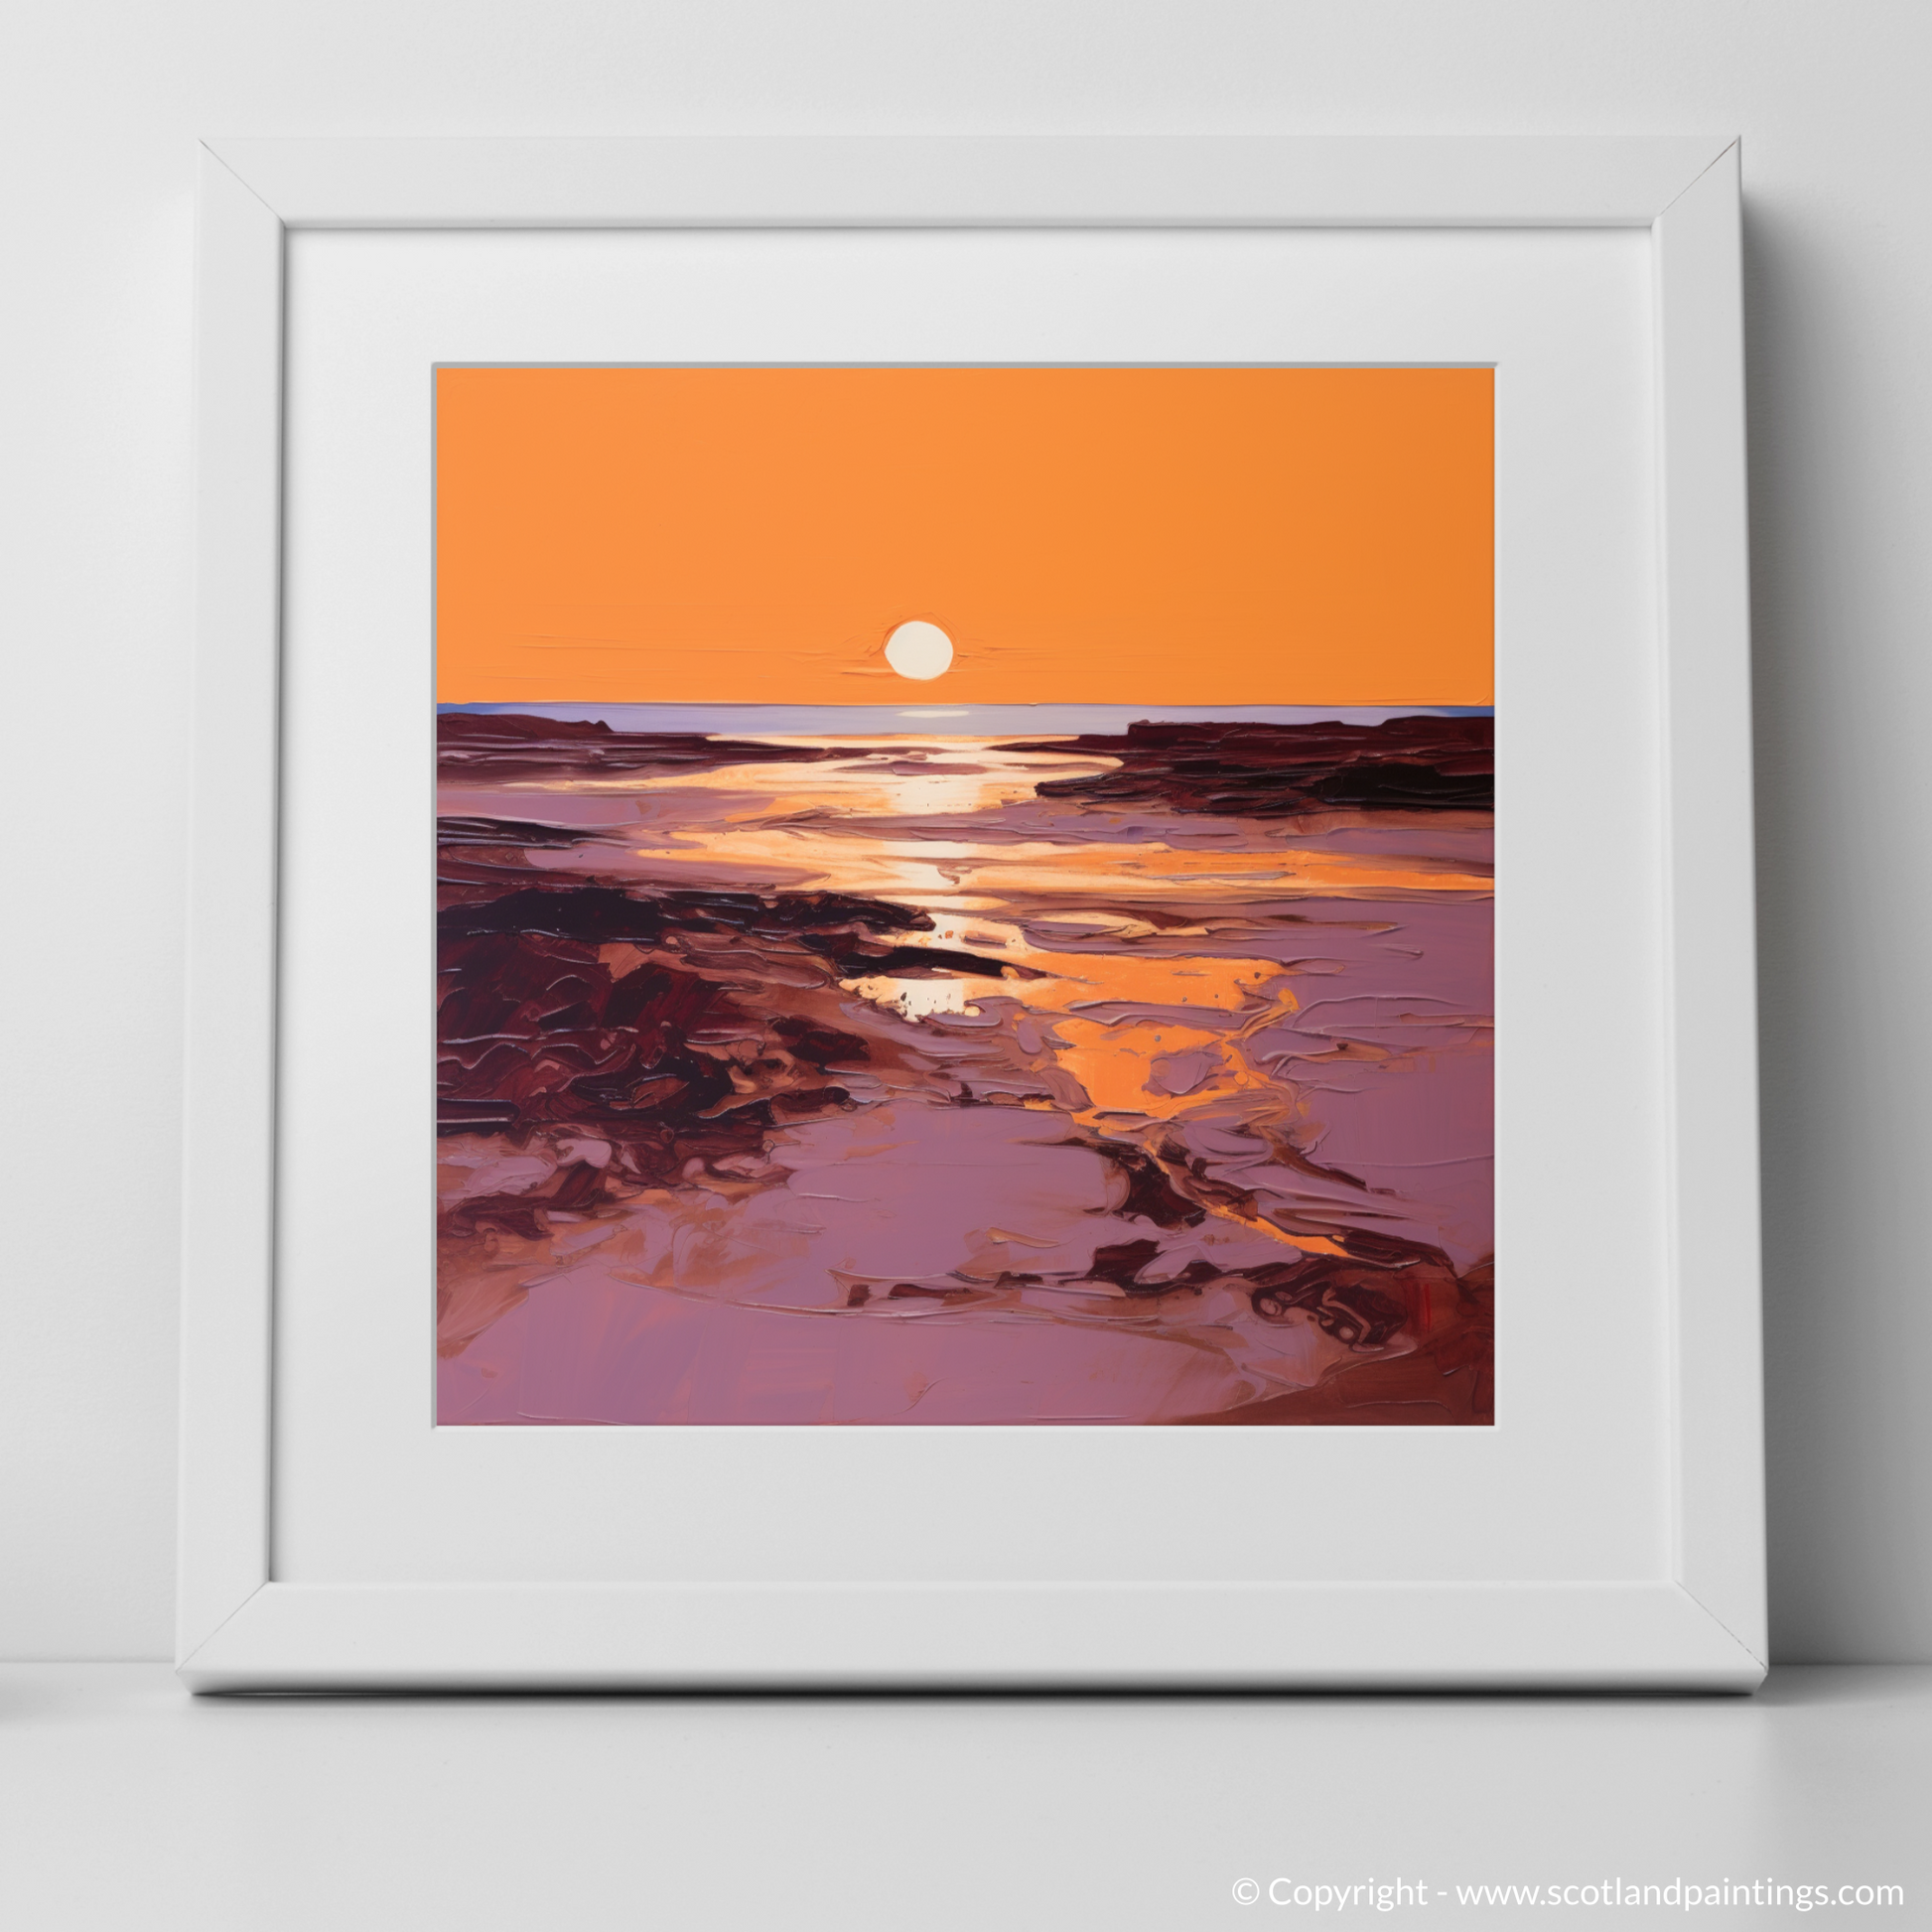 Art Print of Balmedie Beach at golden hour with a white frame